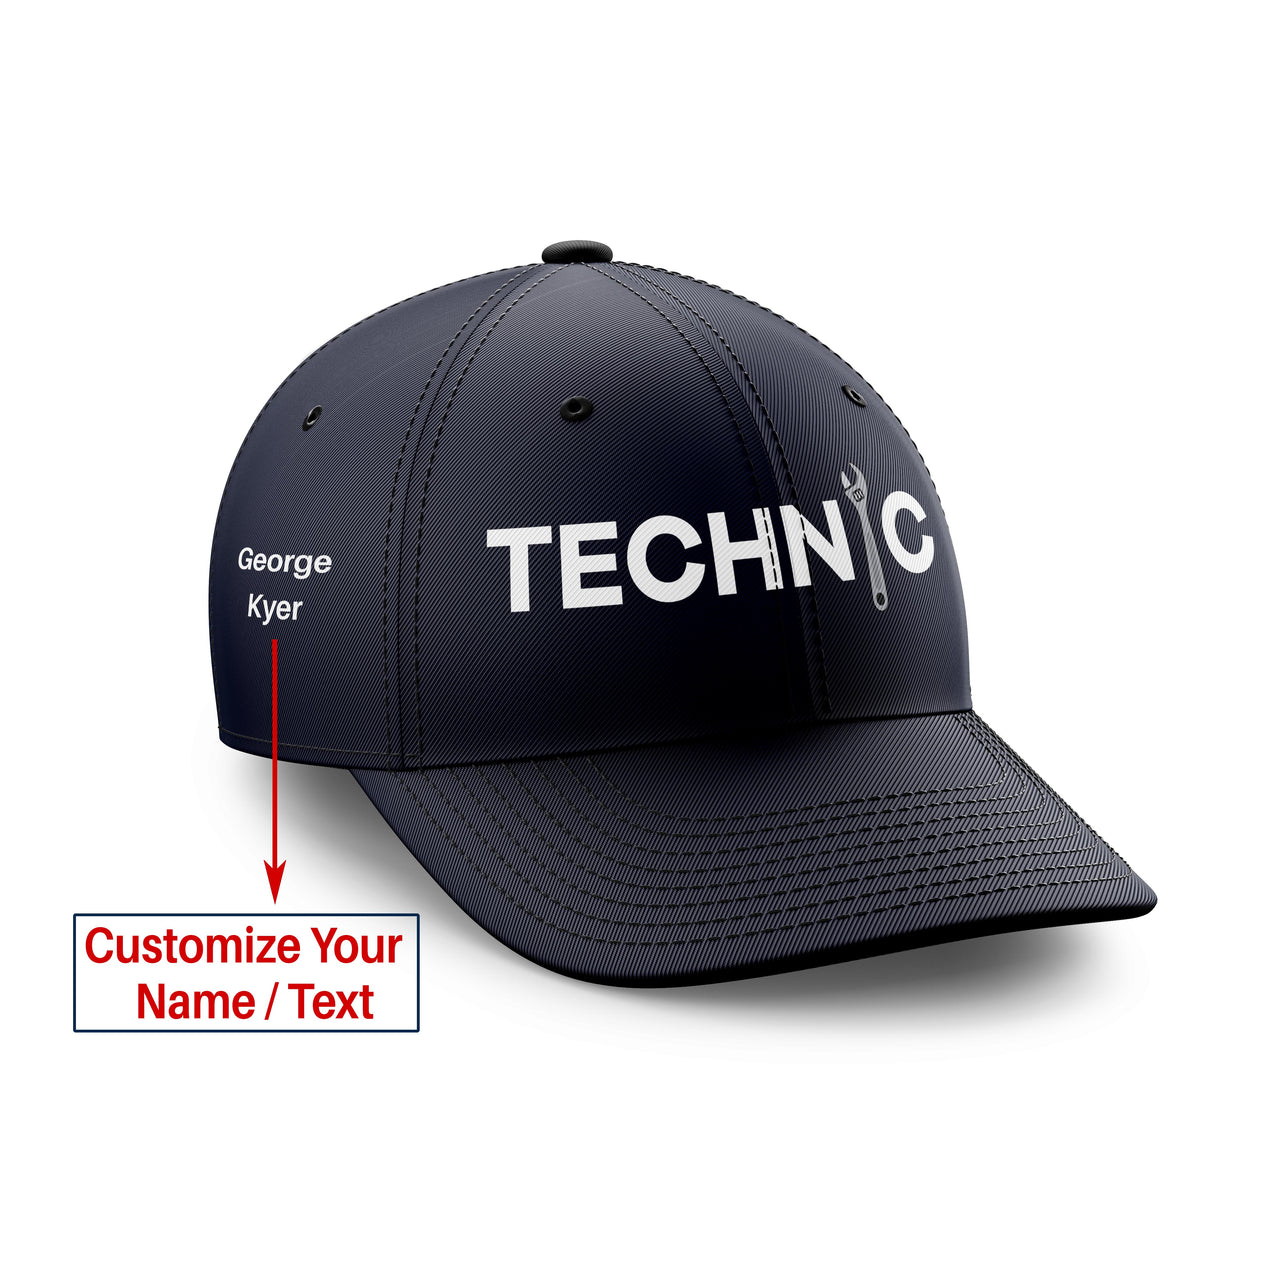 Customizable Name & Technic Embroidered Hats